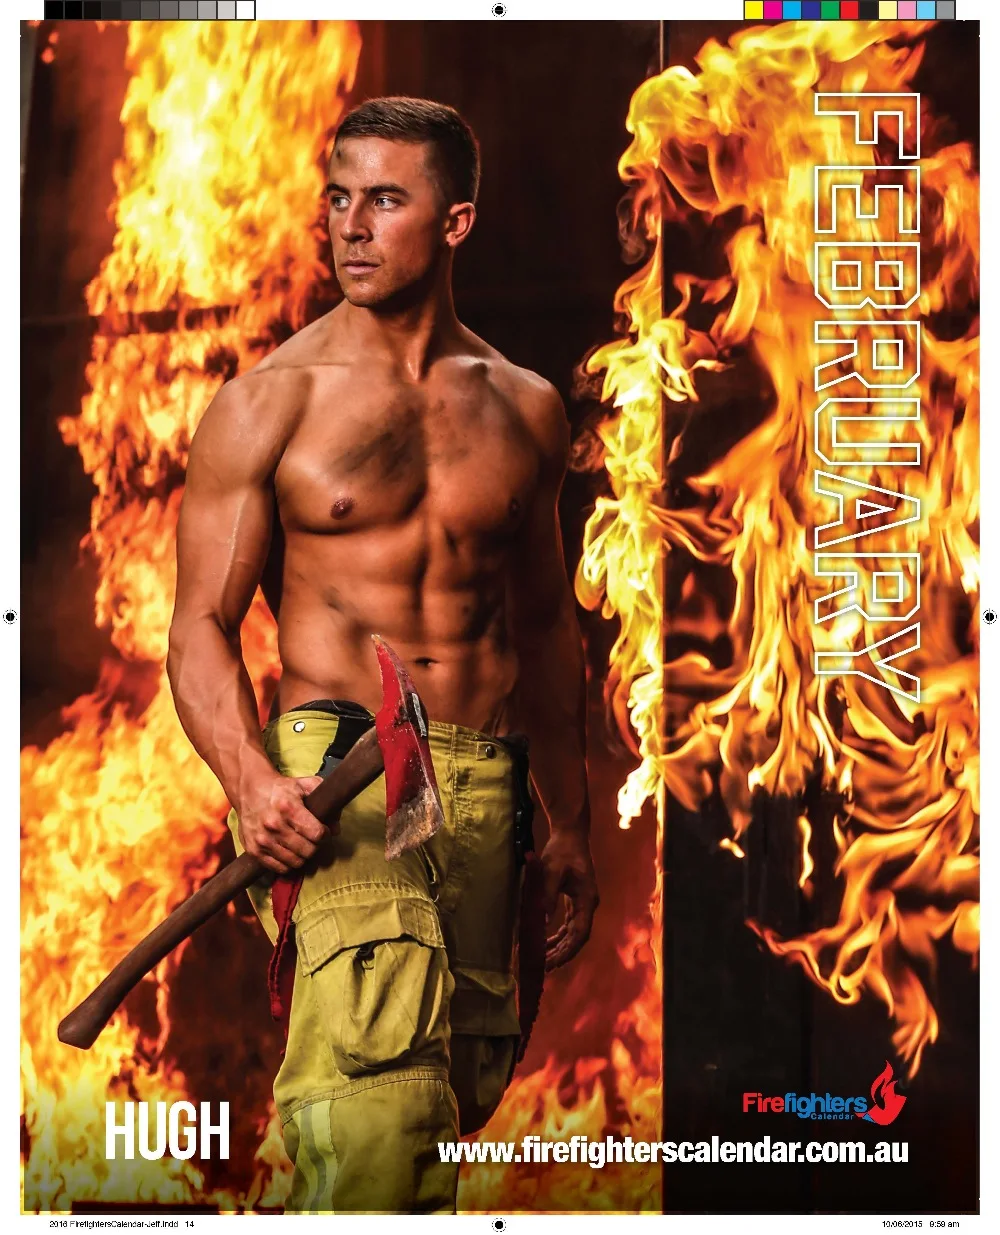 An International Edition Of Australia's Sexiest Firefighters Calendar Is Coming